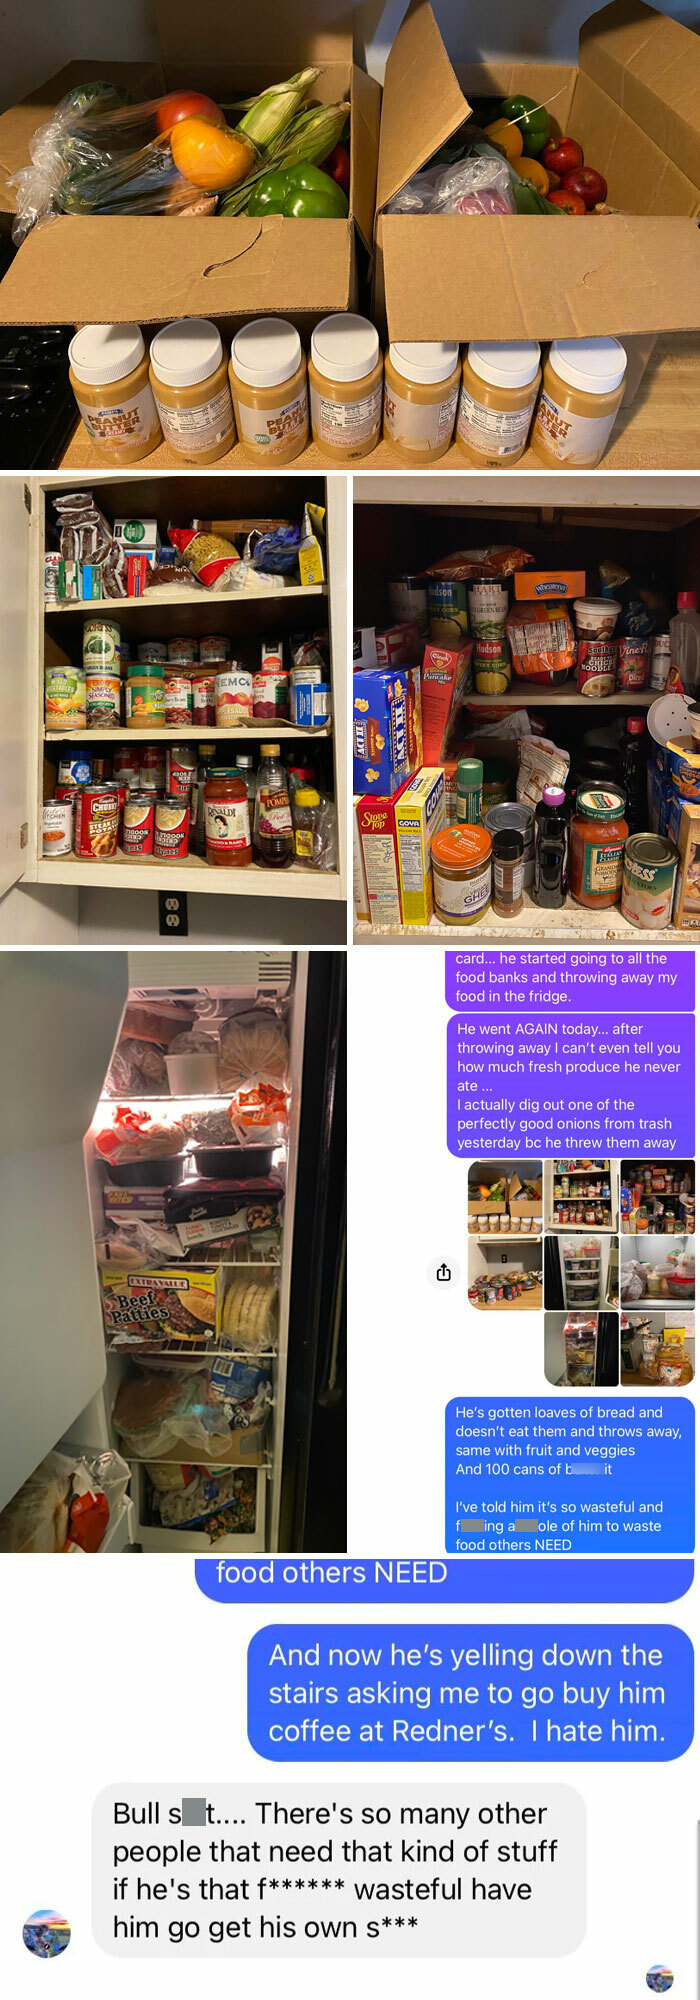 My Soon-To-Be Ex-Husband Has Been Taking Advantage Of Local Food Banks "Just Because He Can," He Says But Ends Up Tossing Much Of It Out Because It Goes Bad